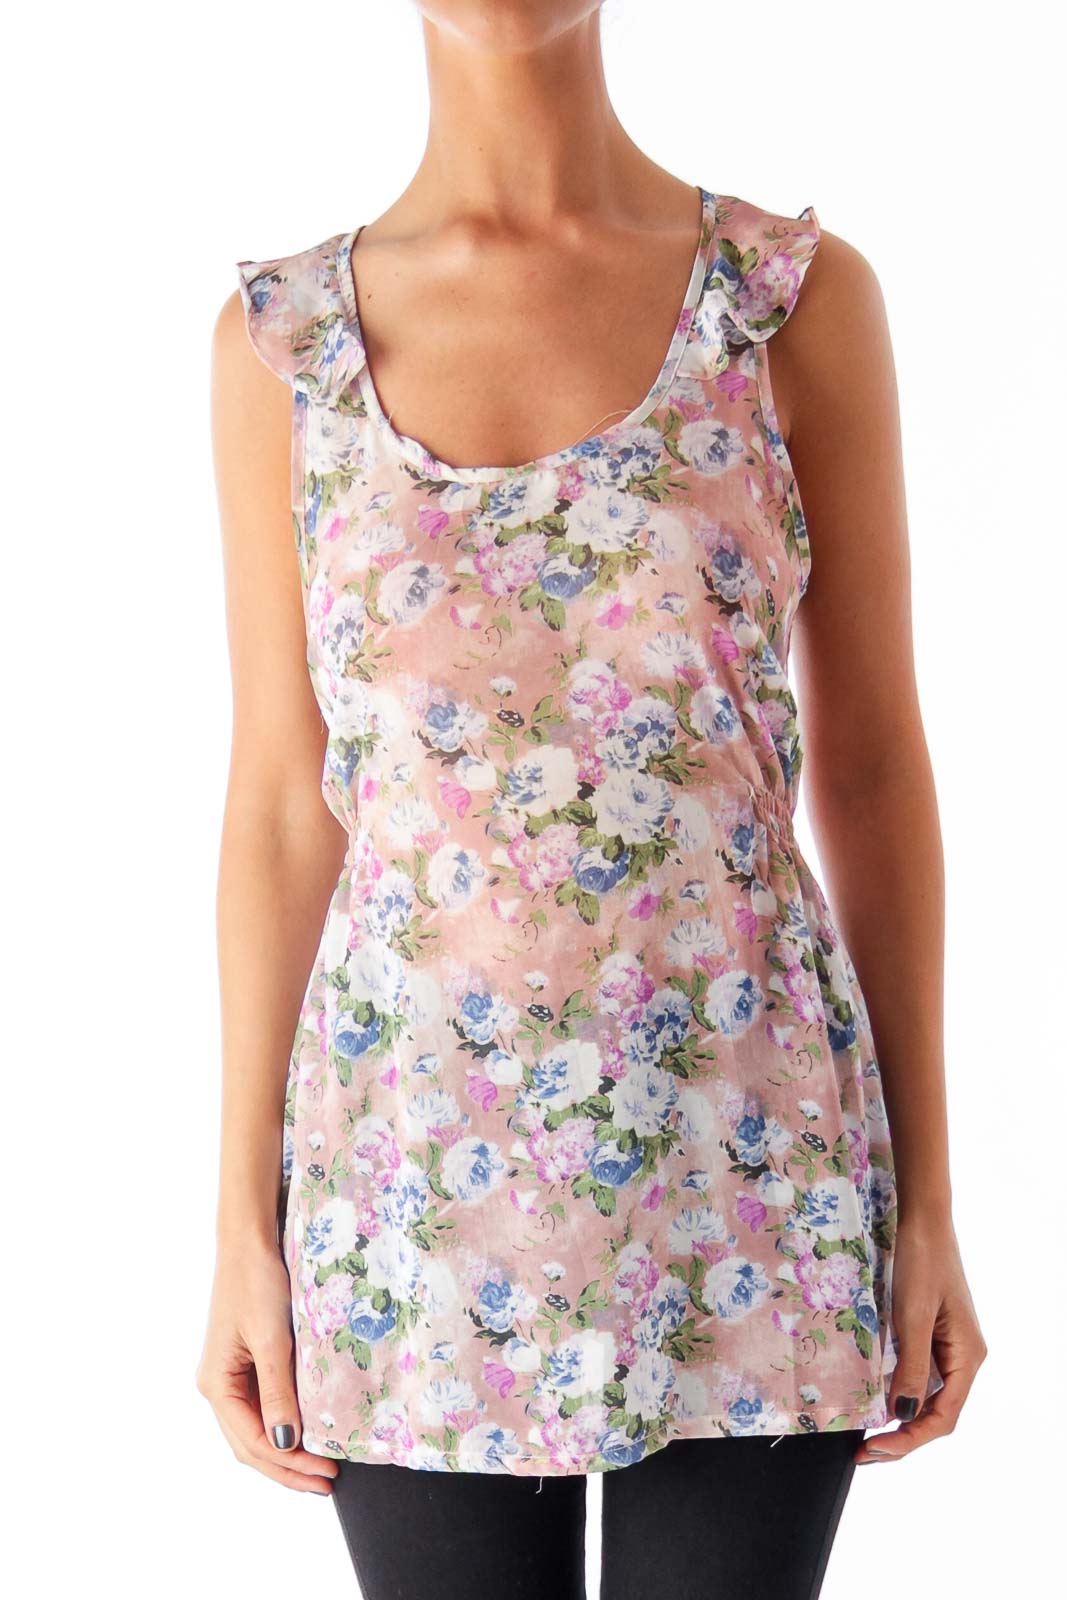 Pink Floral Race Back Top Front